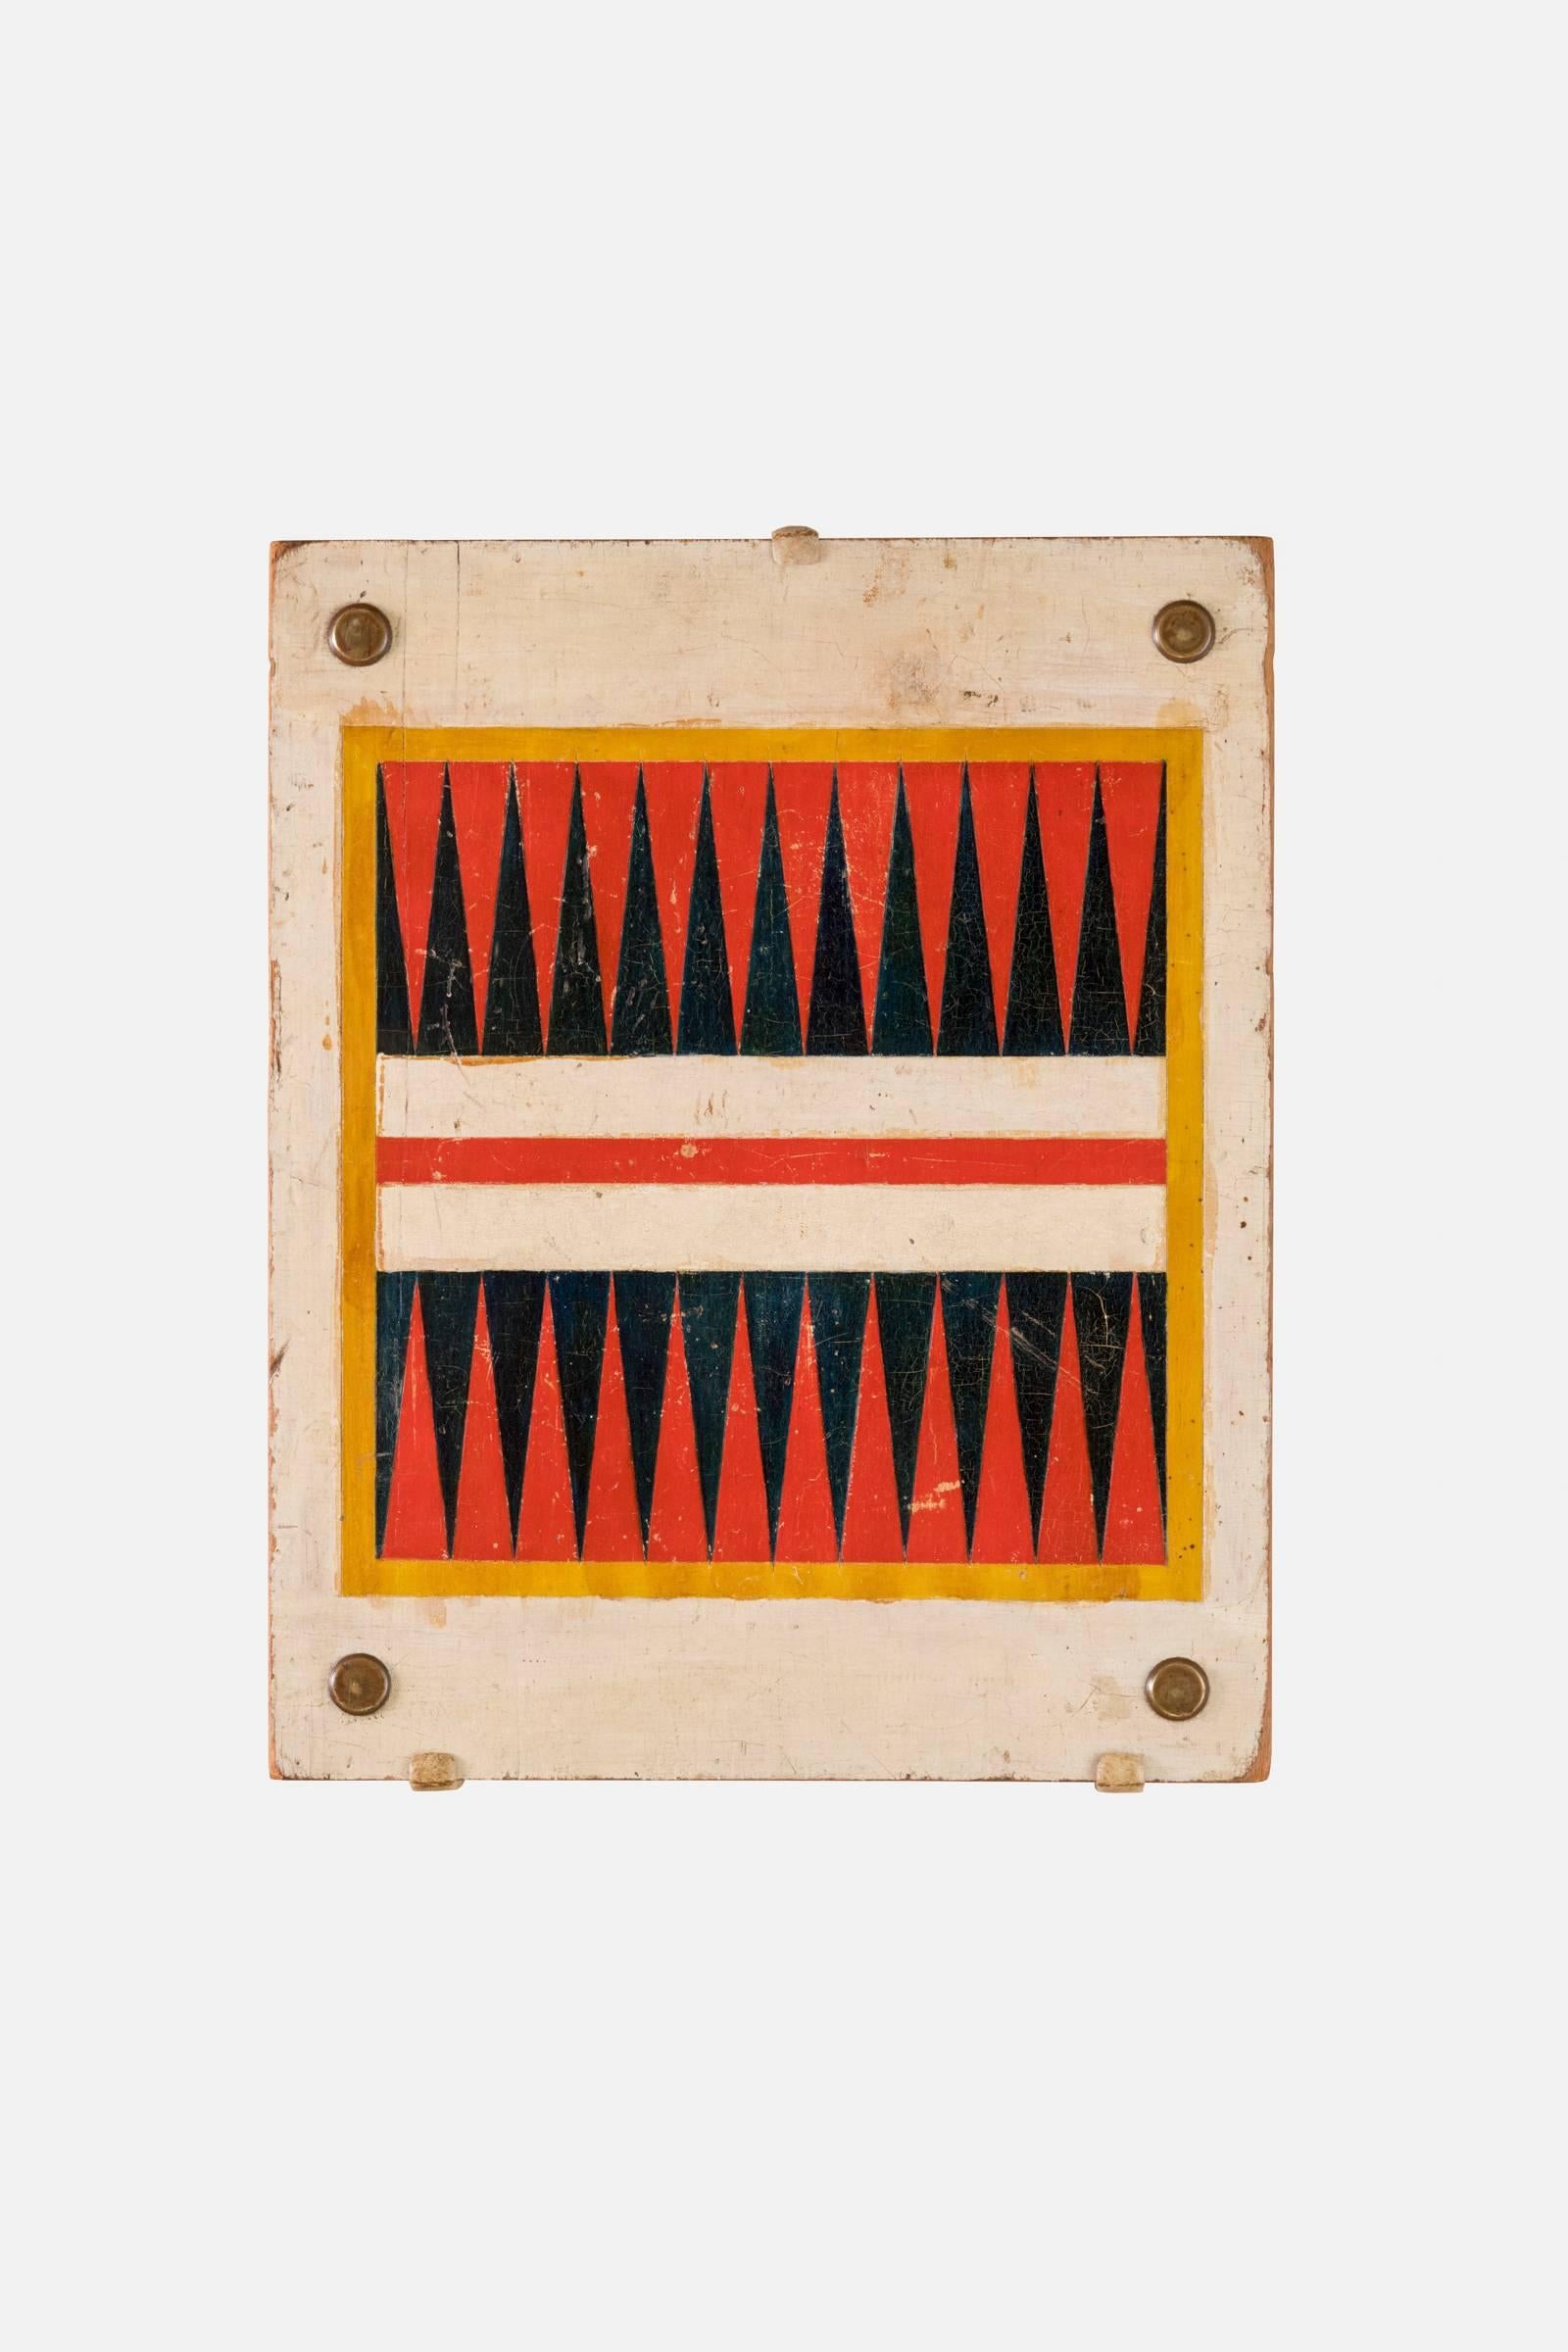 A double-sided gameboard painted for backgammon and checkers.
American, circa 1900
Pine with original incised and painted finish with brass caps

This piece can be mounted for display of either side.